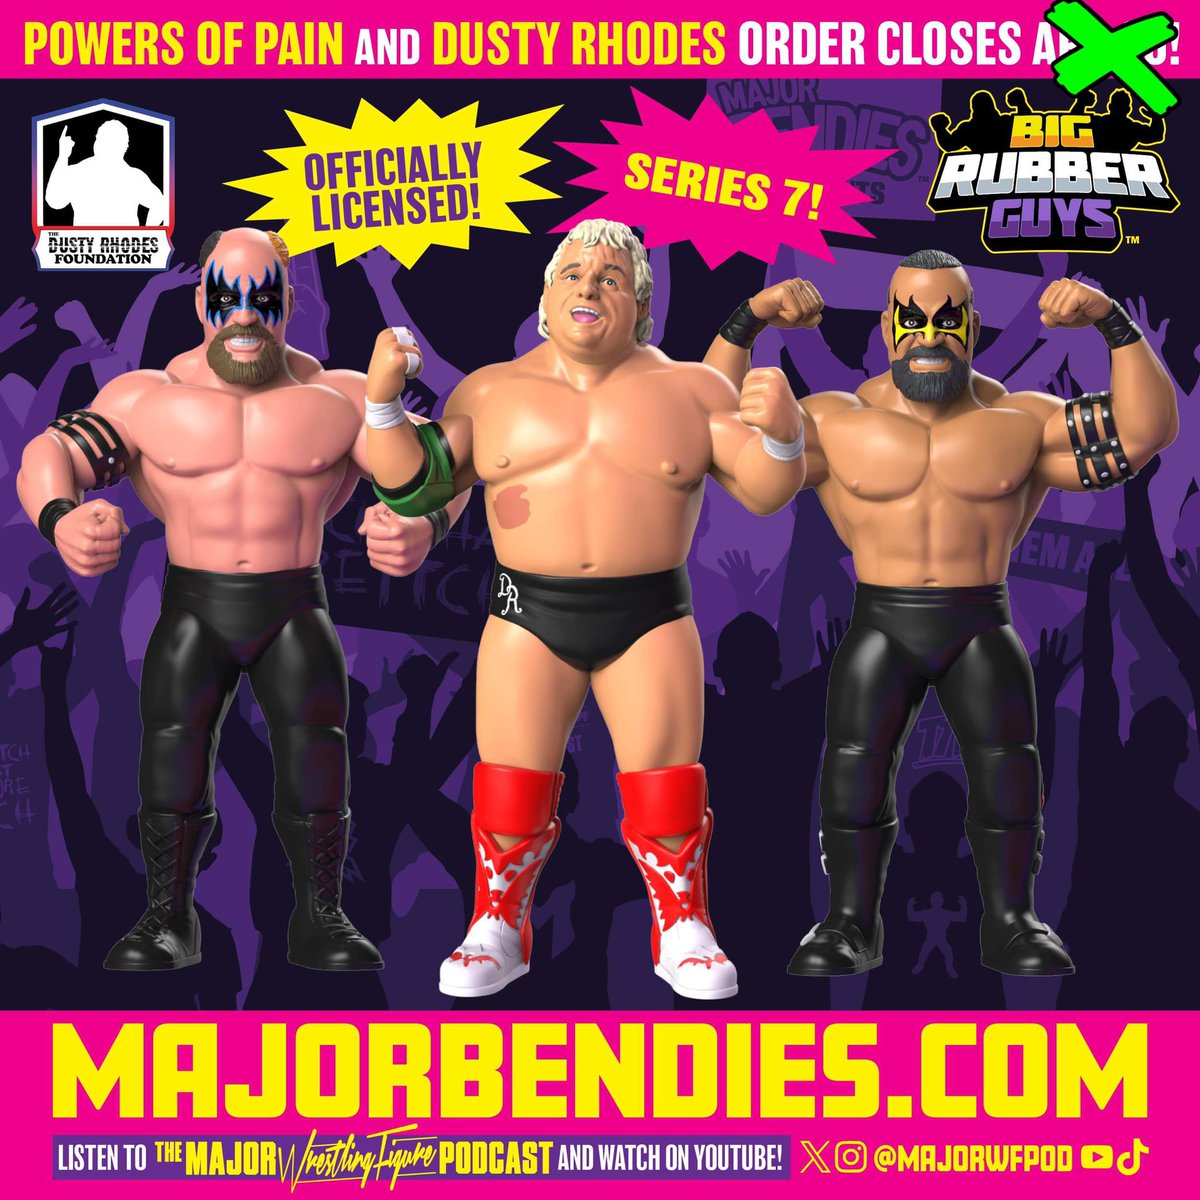 Today is your LAST DAY to order from MajorBendies.com! Take a look at these Unfinished Prototype #BigRubberGuys alongside some of our previous releases! Get your Powers of Pain and Dusty Rhodes before they hit the very expensive secondary market! #ScratchThatFigureItch